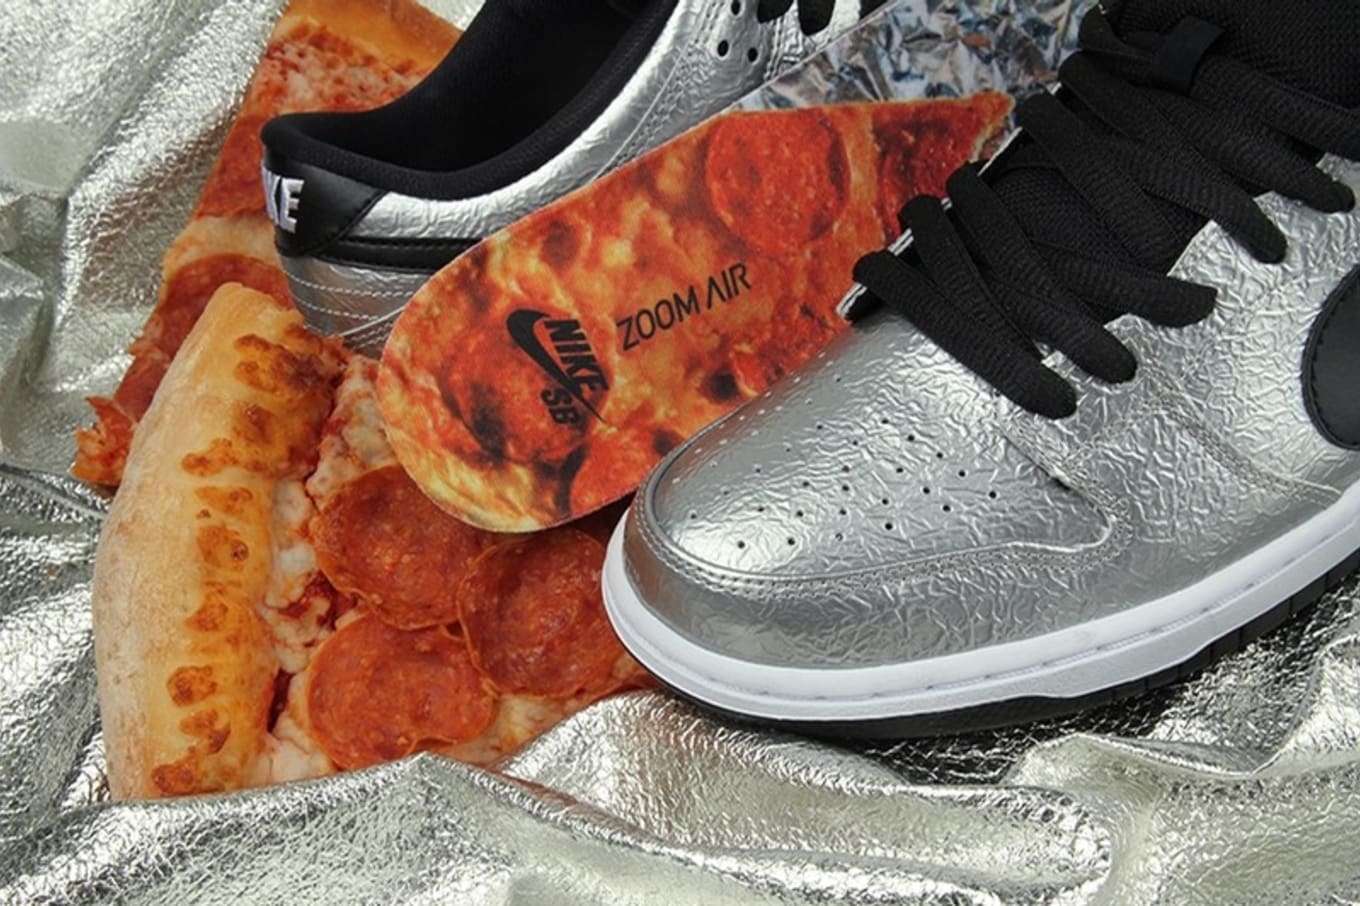 nike dunk cold pizza